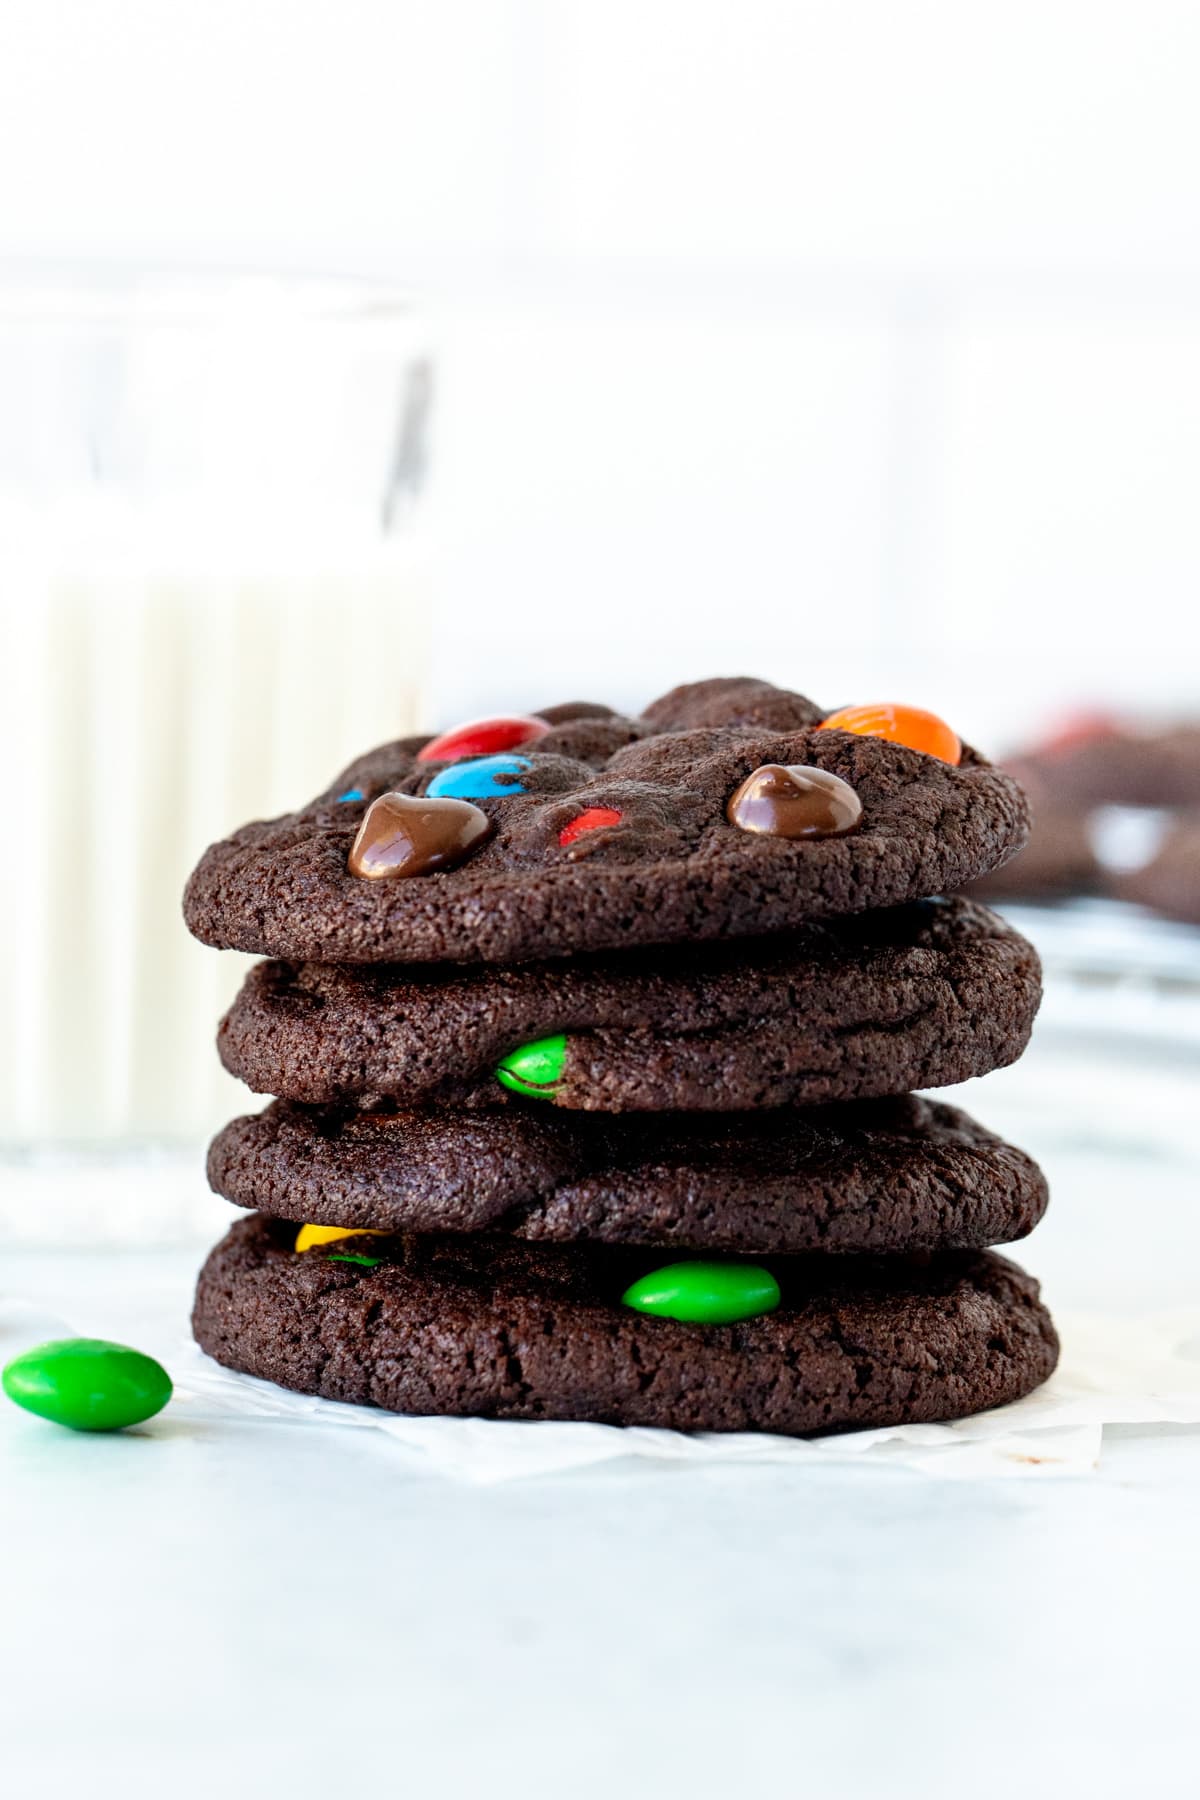 M&M chocolate cookies, placed on on top of each other with glass of milk